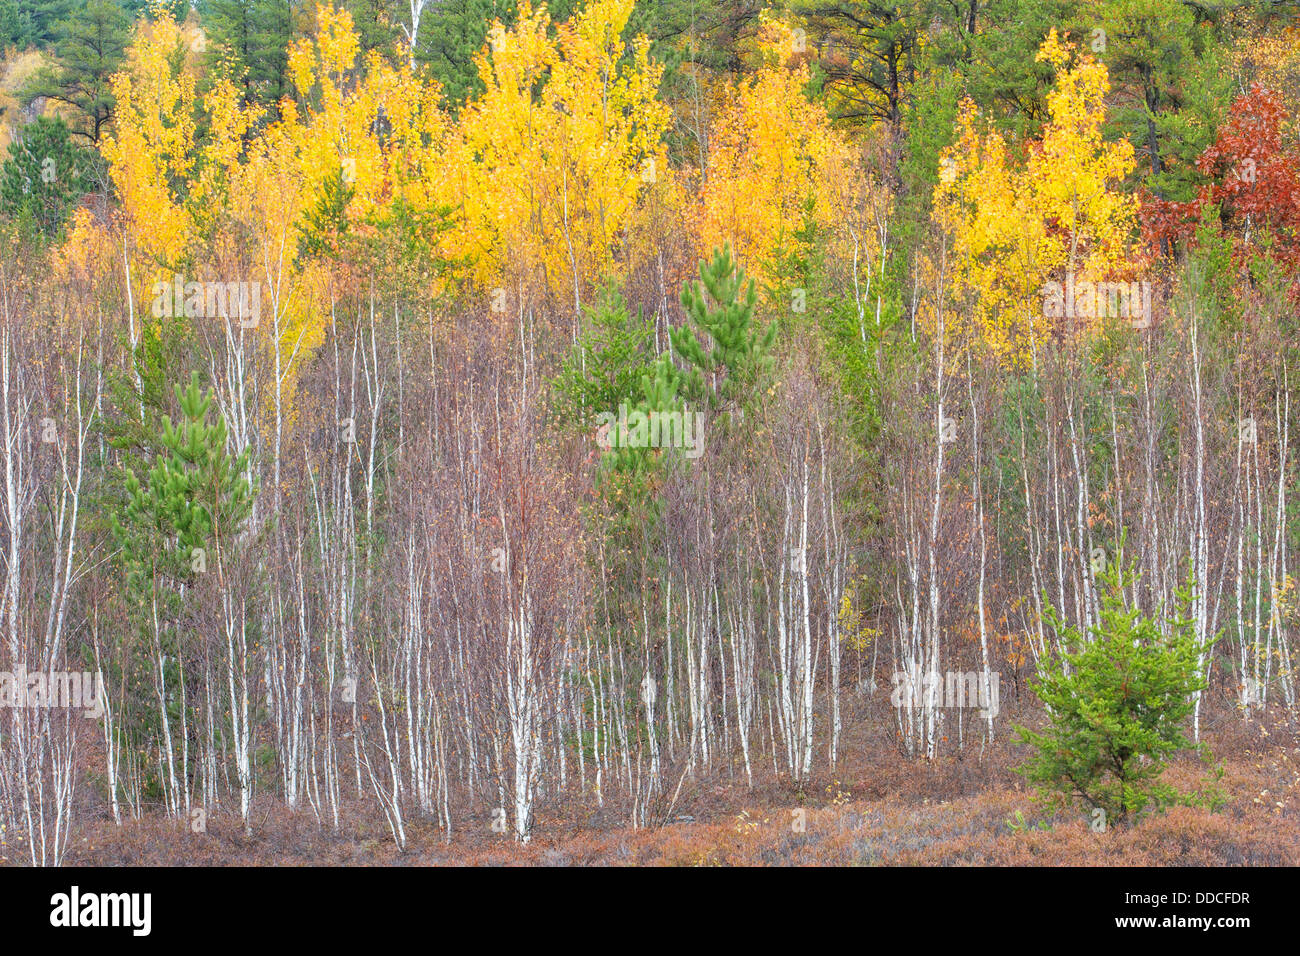 A forest scene in late autumn, Wanup, City of Greater Sudbury, Ontario, Canada. Stock Photo